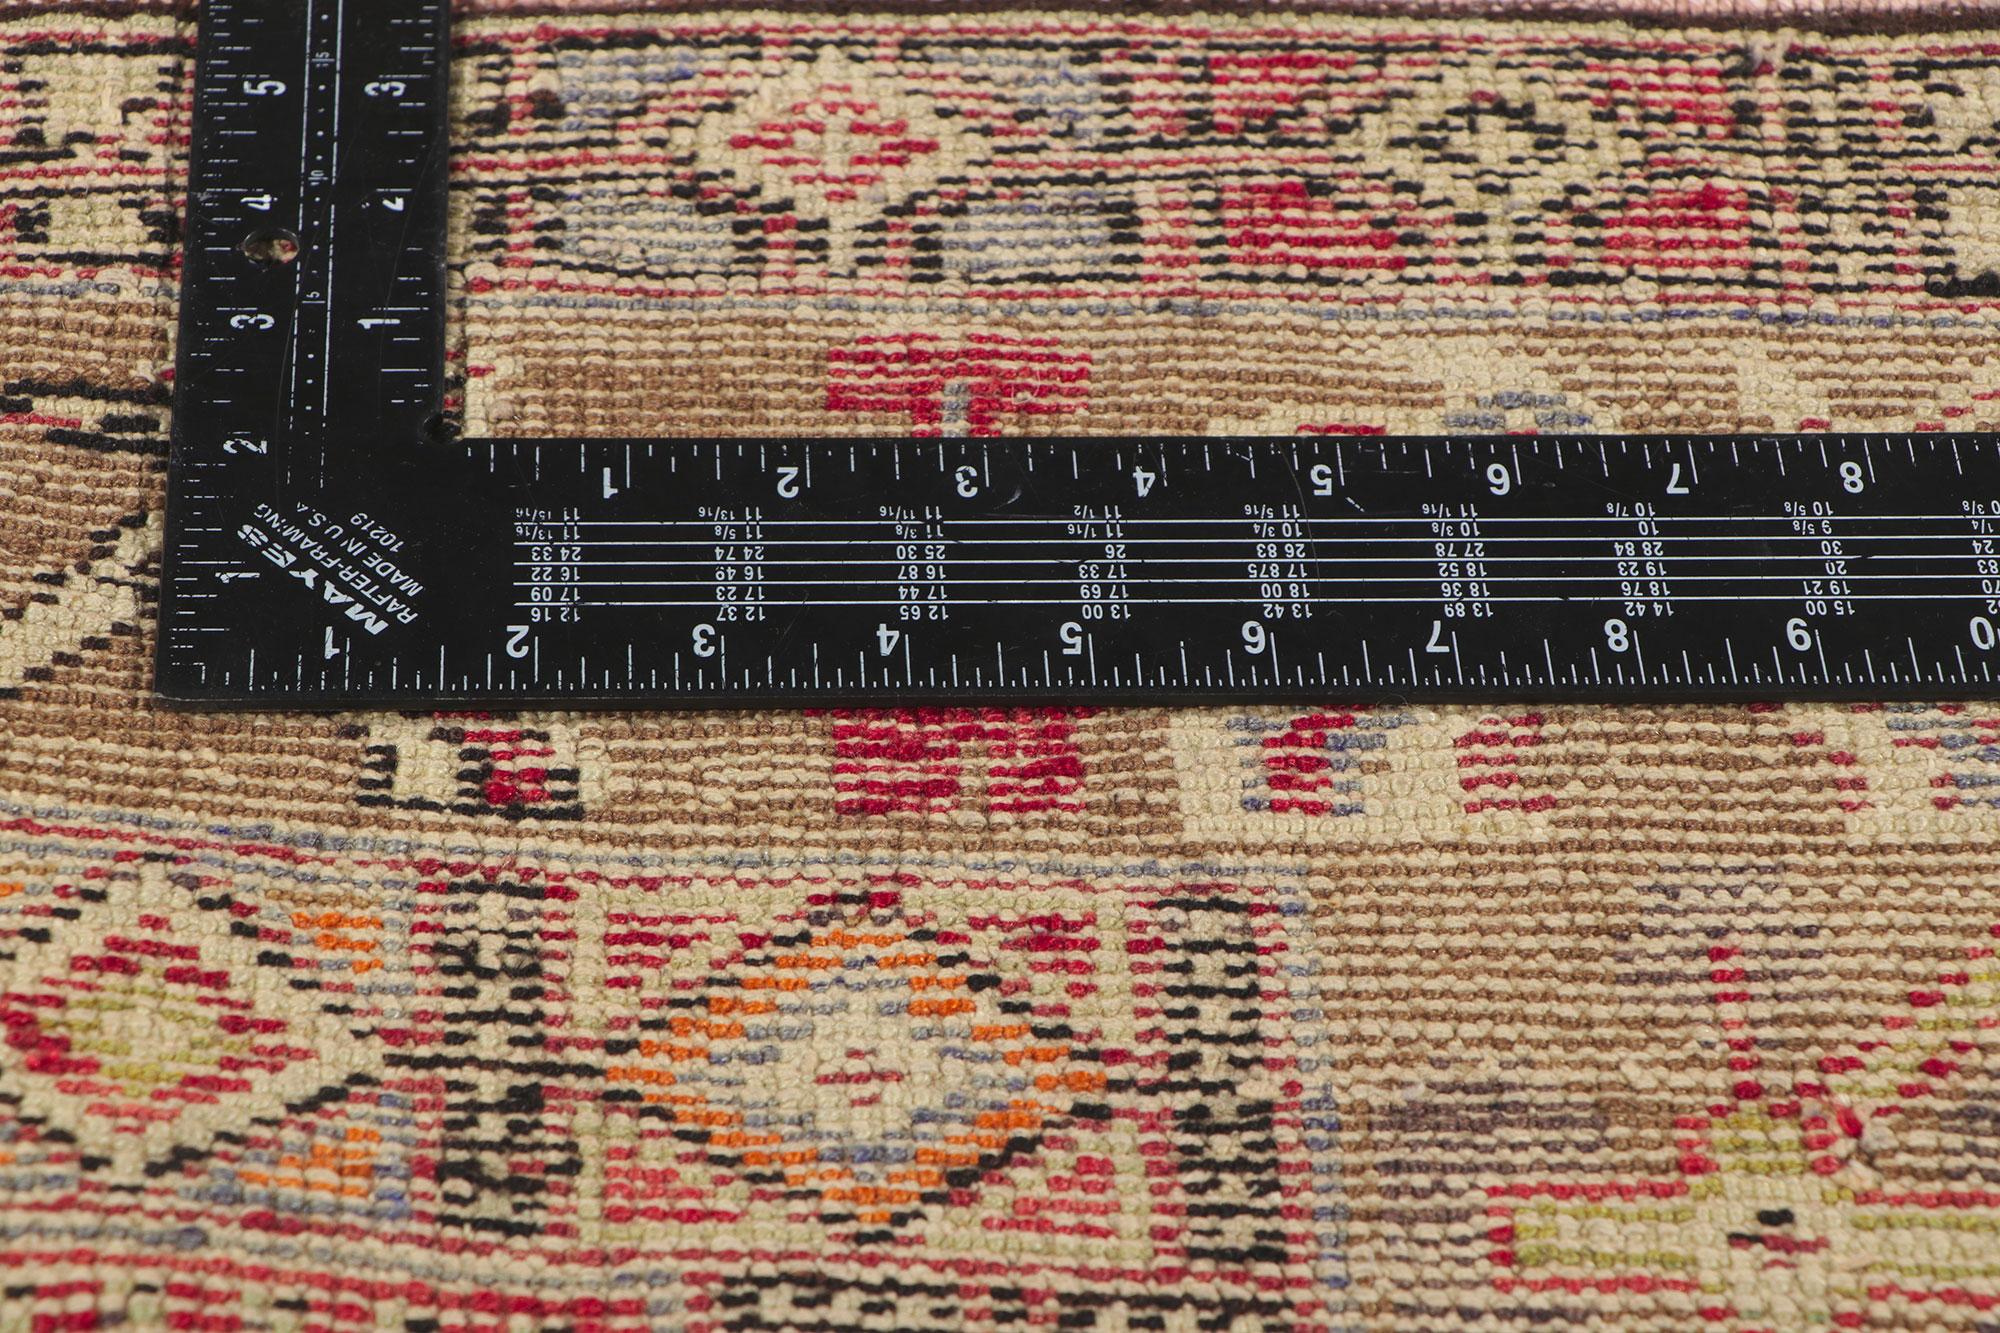 50068 Vintage Turkish Oushak Runner, 04’02 x 08’10. 
Emanating a timeless, classic style and rustic, tribal vibes this vintage Turkish Oushak runner enraptures with stunning detail and decorative elements. Bespoke elegance and familiar comfort